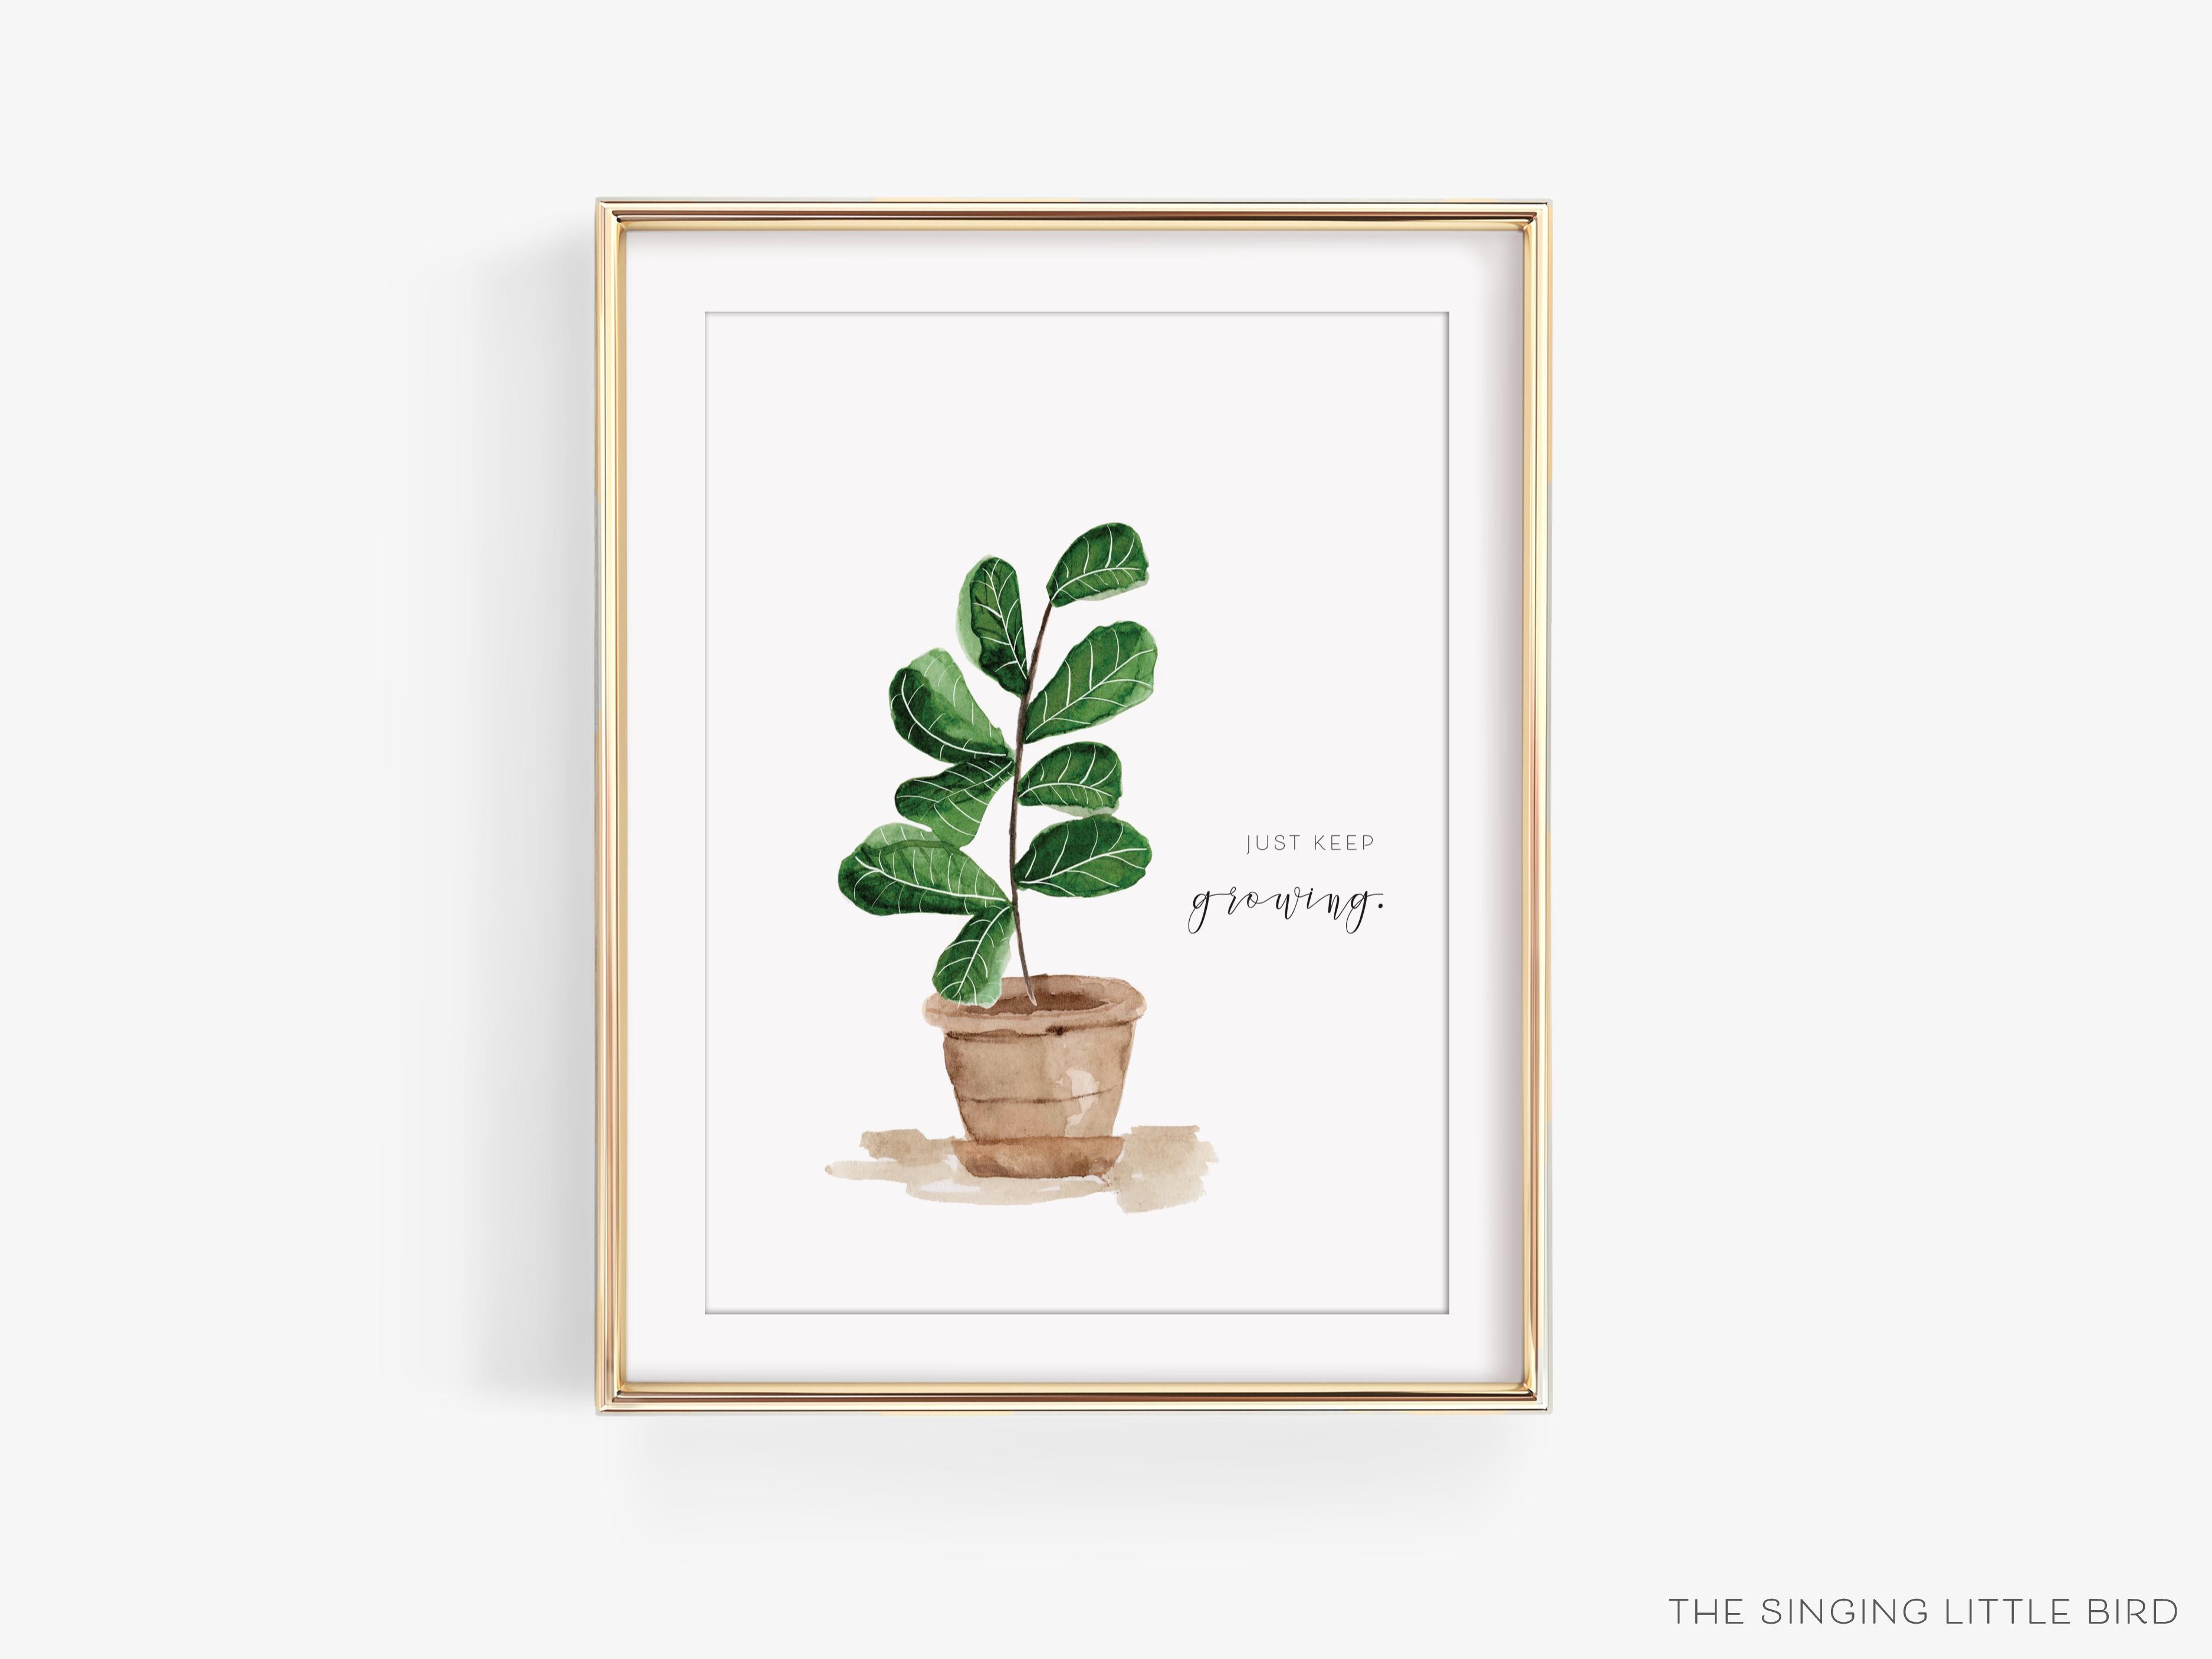 Fiddle Leaf Fig Quote Art Print-This watercolor art print features our hand-painted fiddle leaf fig and "Just keep growing" quote, printed in the USA on 120lb high quality art paper. This makes a great gift or wall decor for the plant lover in your life.-The Singing Little Bird